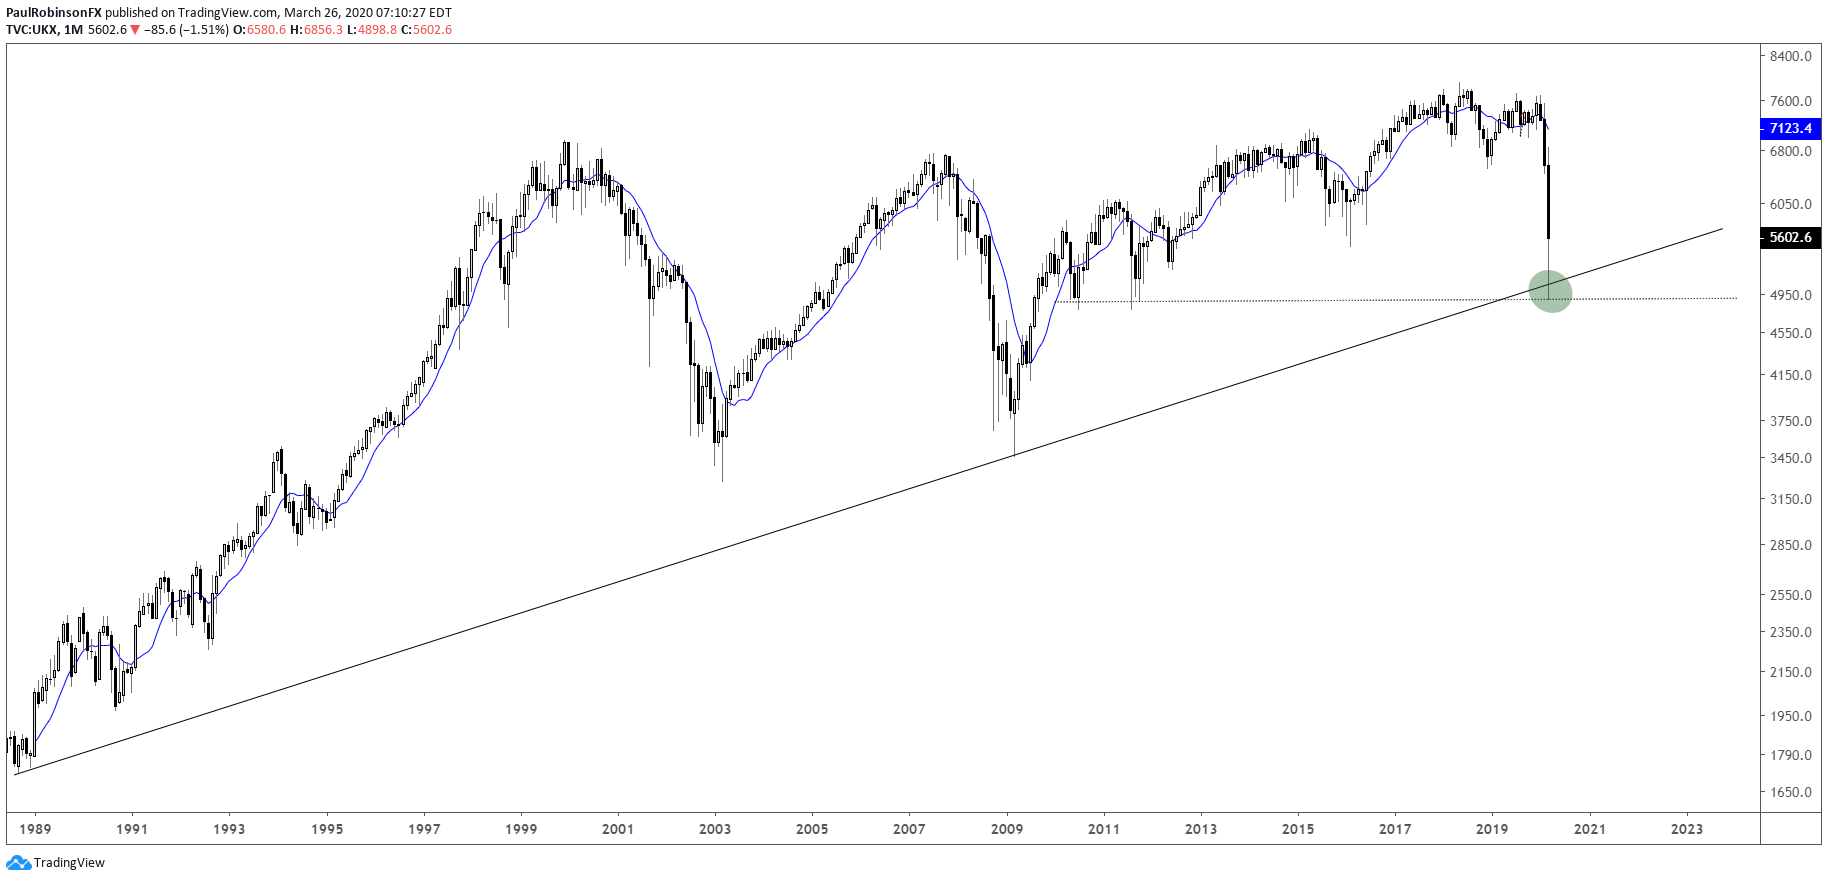 FTSE 100 Technical Outlook - Long-term Support Keeps Index Afloat